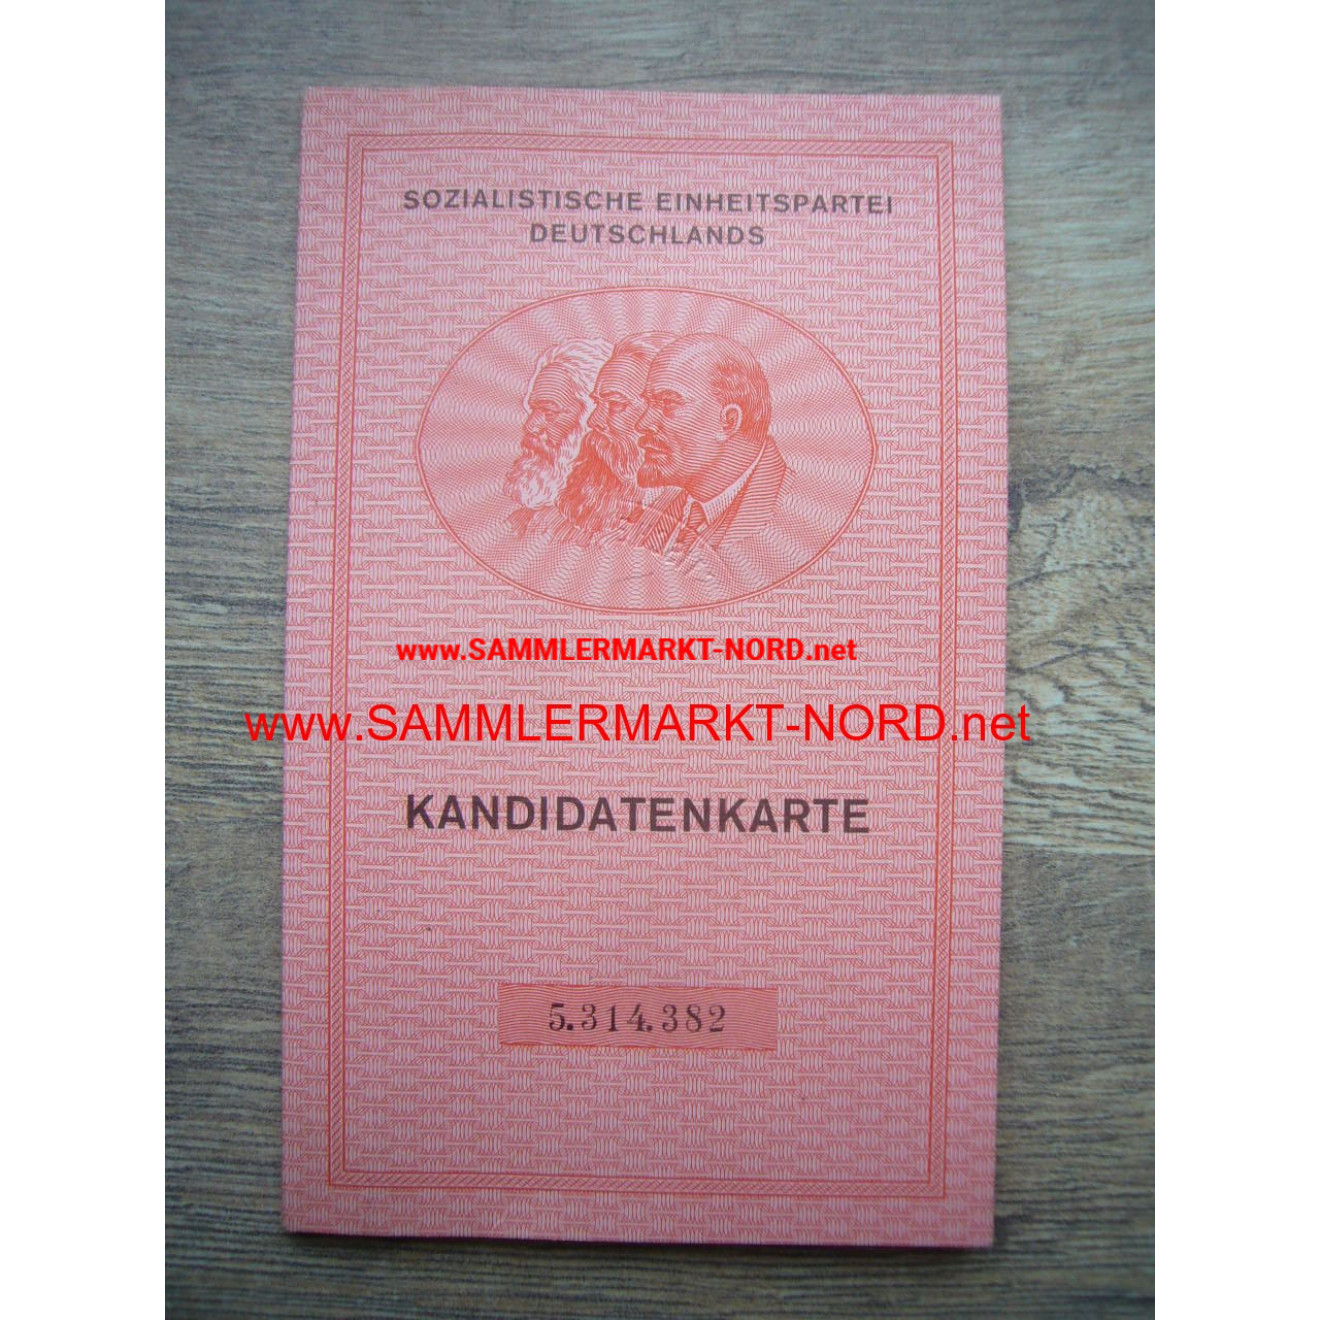 GDR - SED party - candidate card